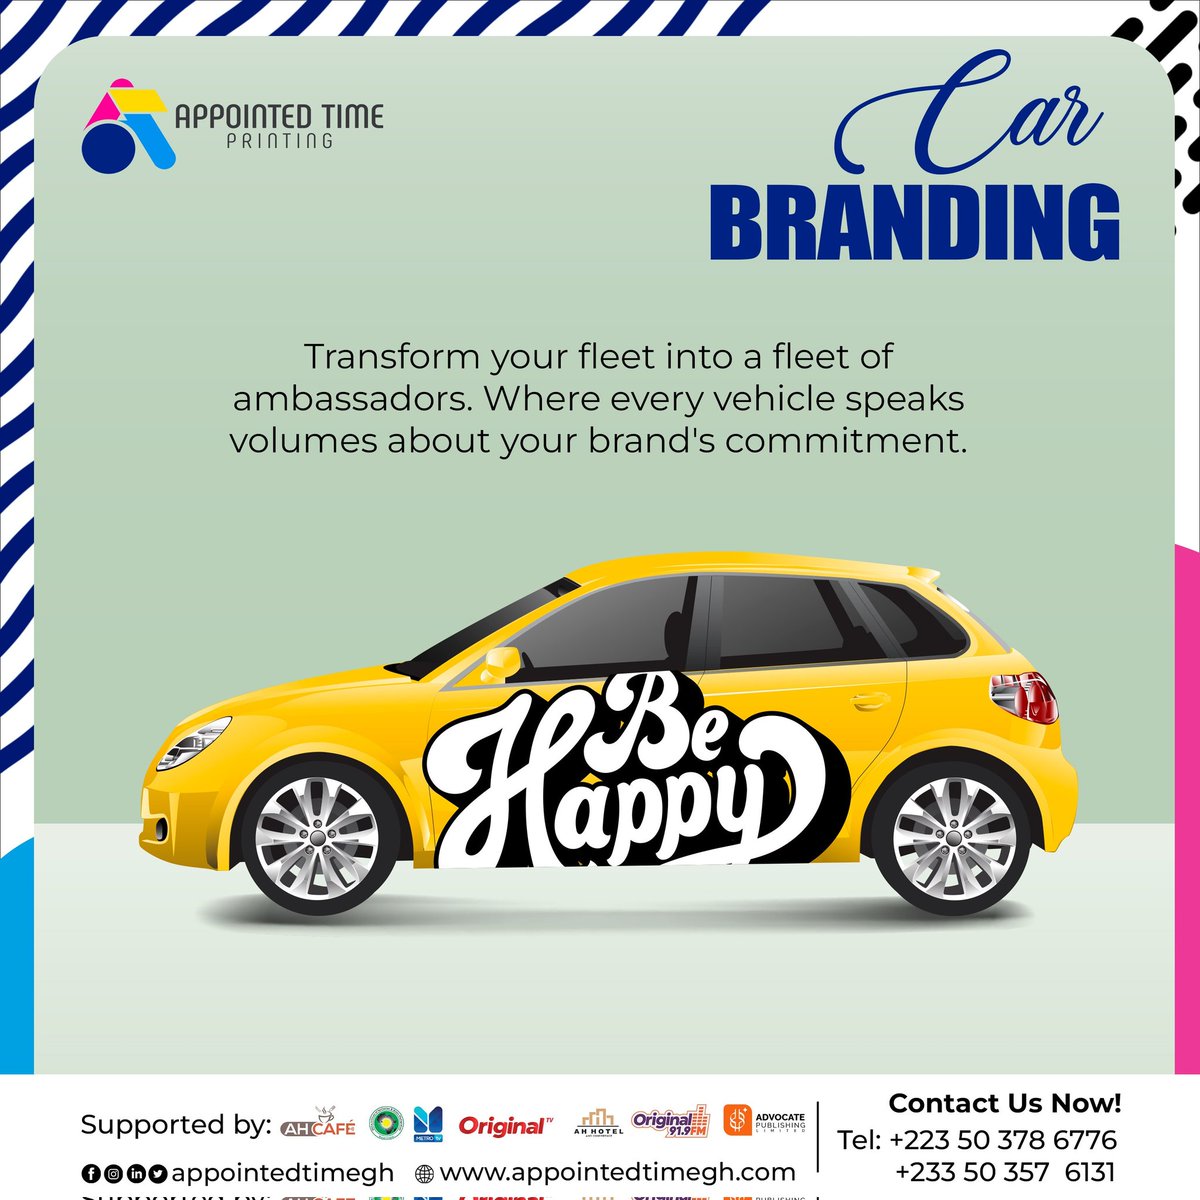 Transform your fleet into brand ambassadors with @AppointedTimeGh. Let your vehicles speak volumes about your brand's commitment wherever they go. #Branding #FleetTransformation #BrandAmbassadors

Embarrassing KODA Tracy #ElClasico Dumsor shameless camavinga La Liga Robbed